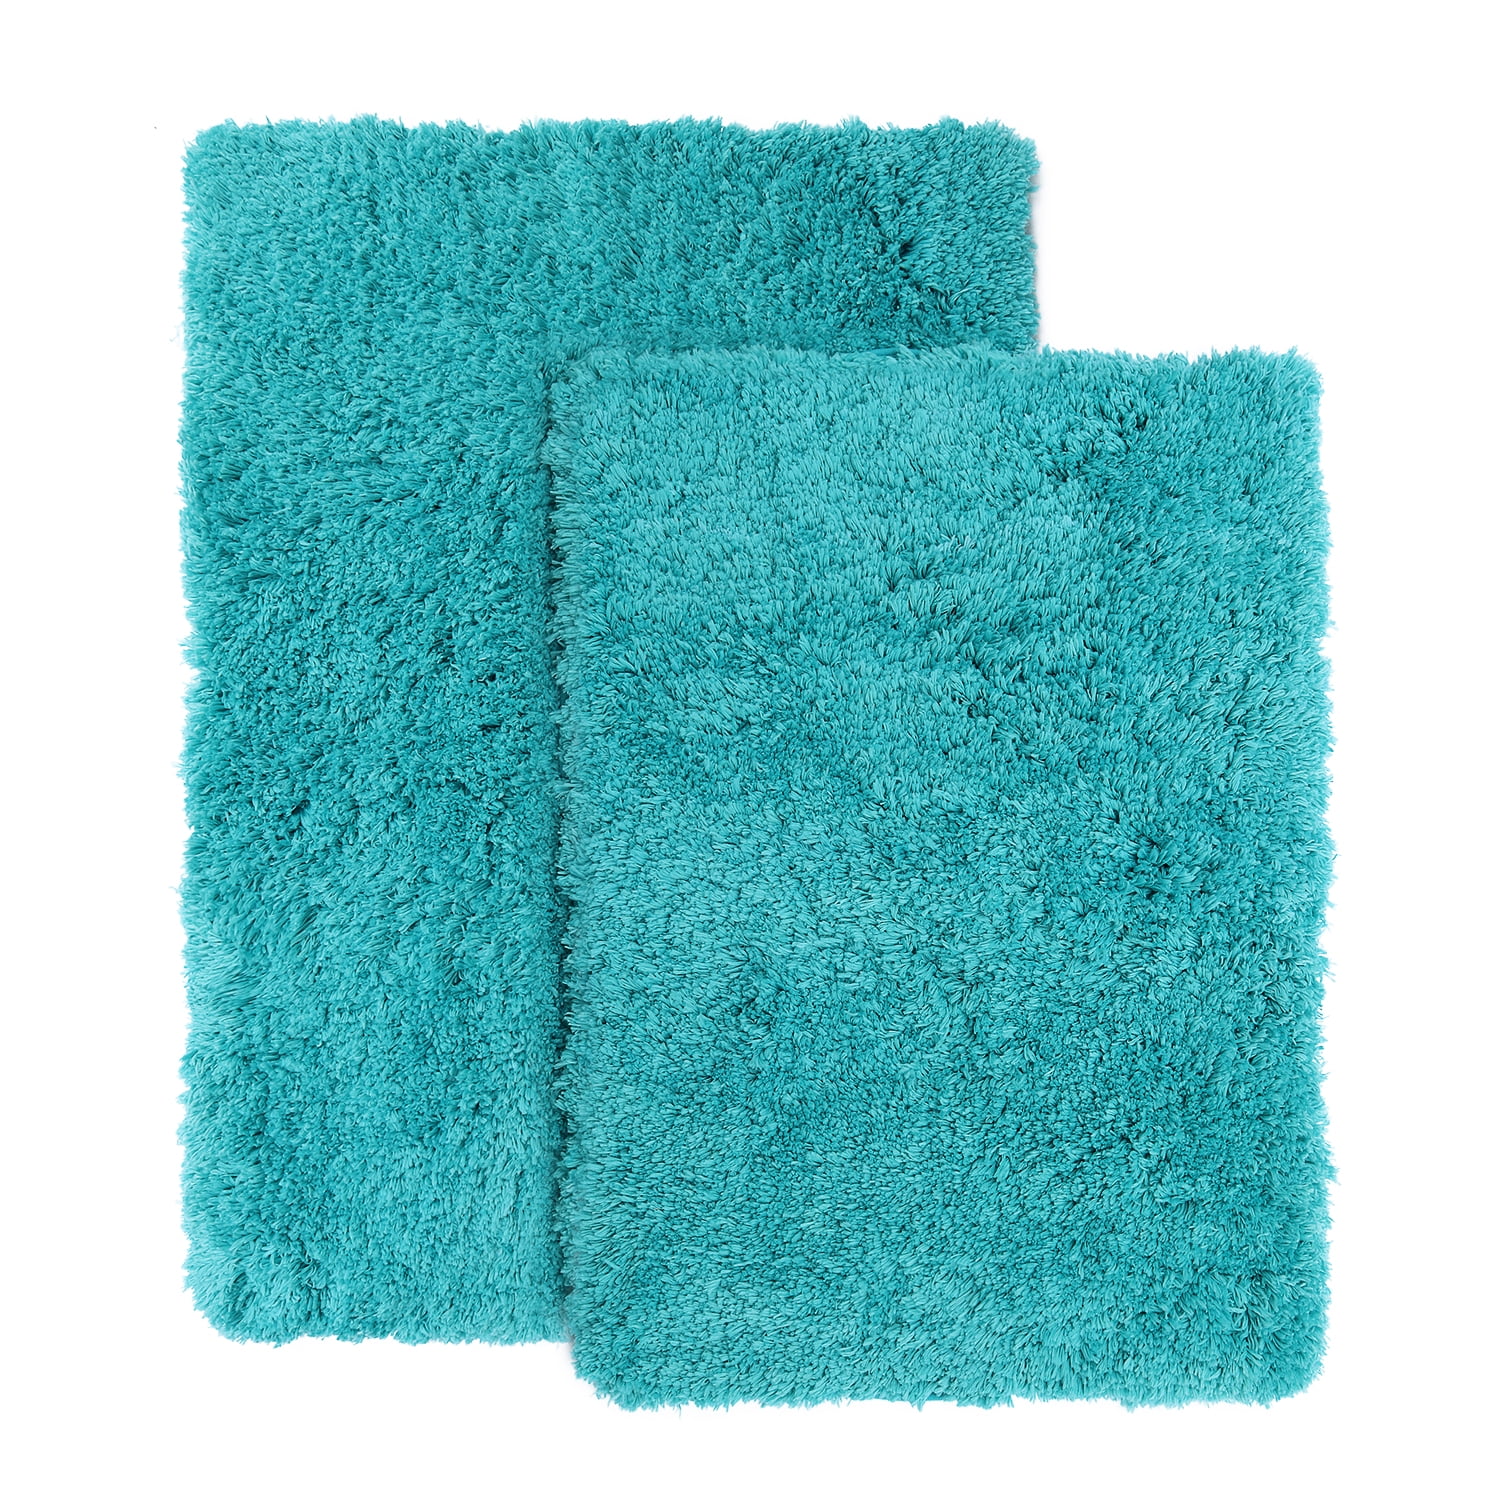 OEAKAY Bath Mat Bathroom Rug Absorbent Non-Slip Washable Shower Floor Mats  Small Carpet 24x43,Turquoise Teal and White